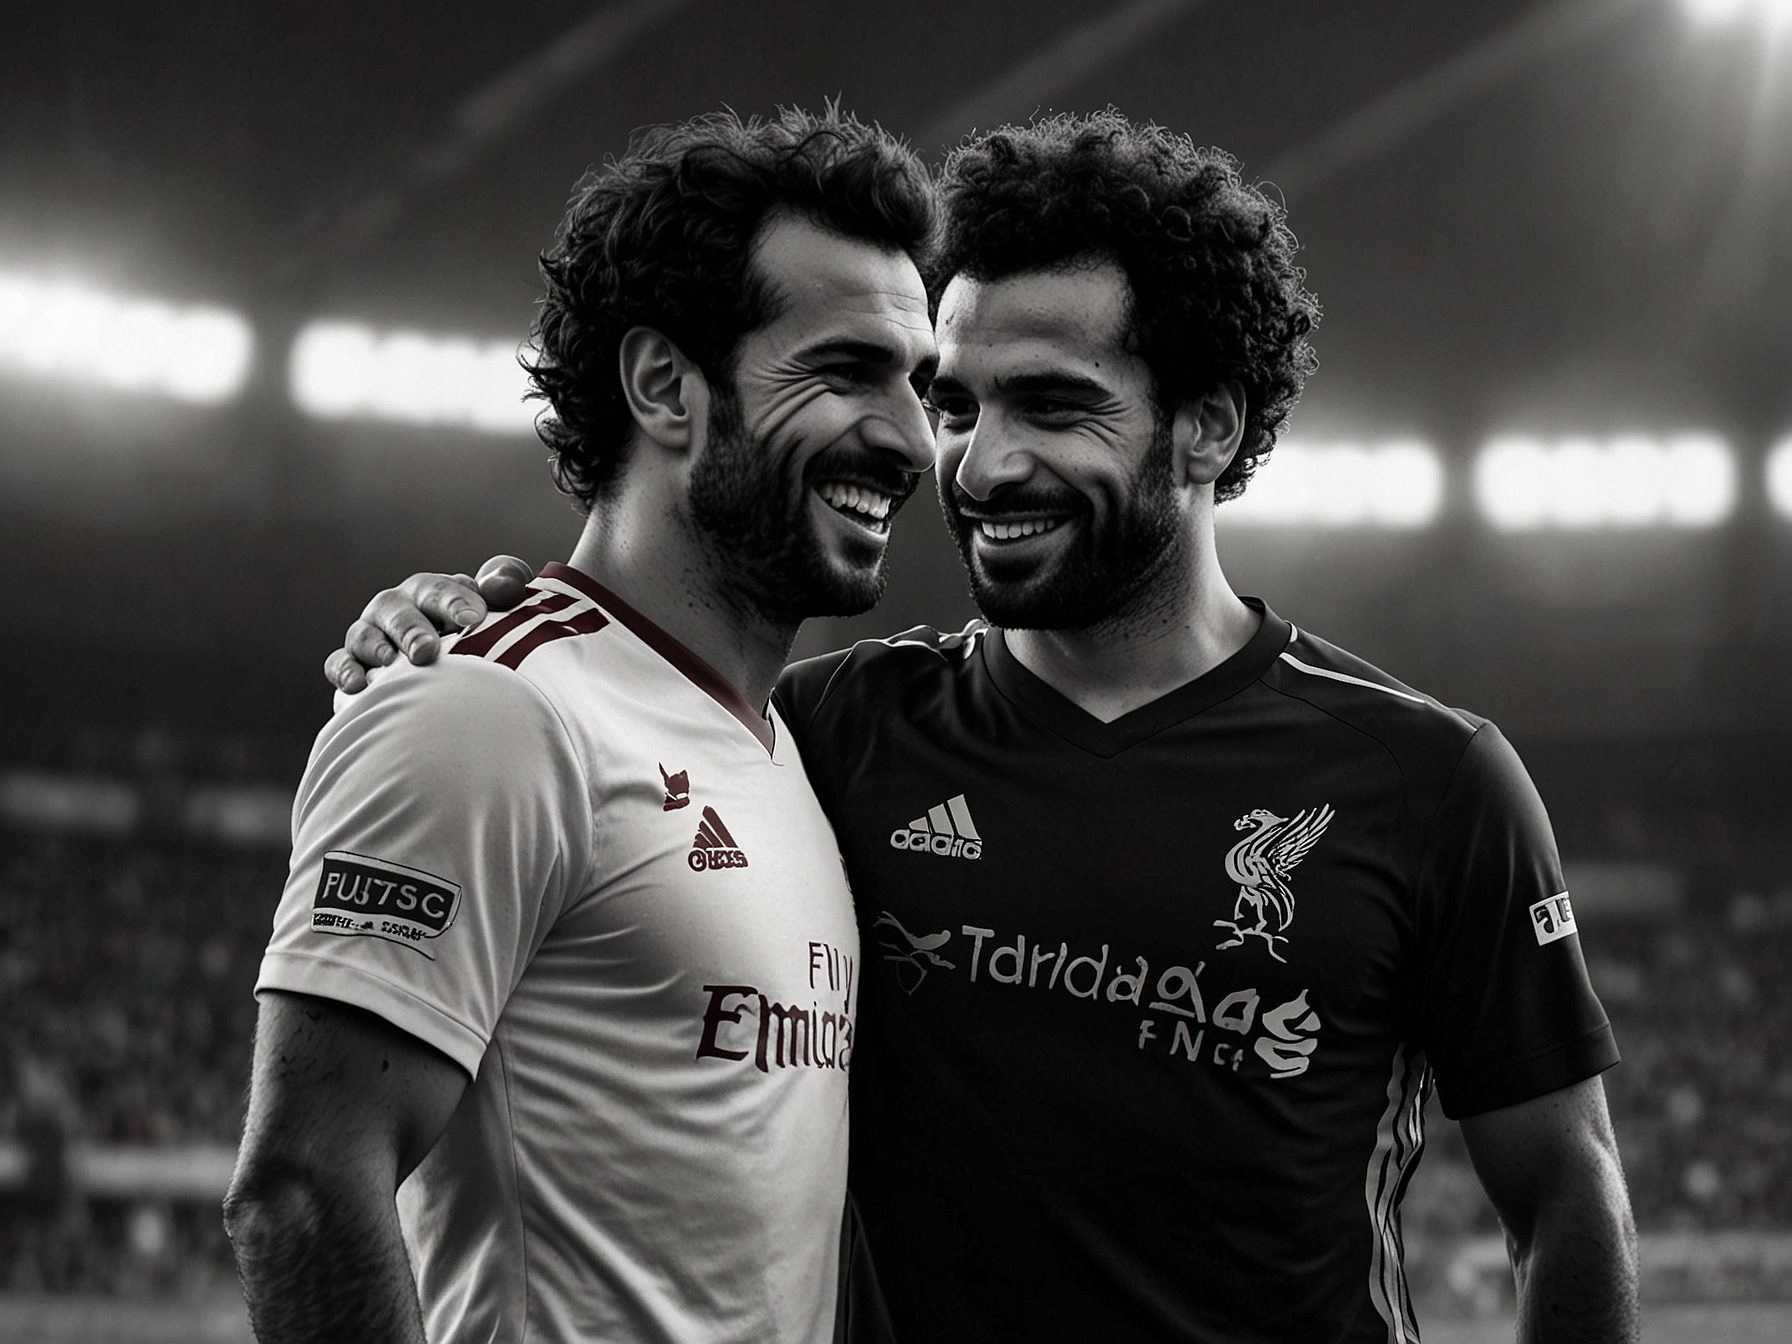 Cesc Fabregas and Mohamed Salah sharing a moment on the football field, illustrating Fabregas's admiration for Salah's exceptional abilities and complete skill set.